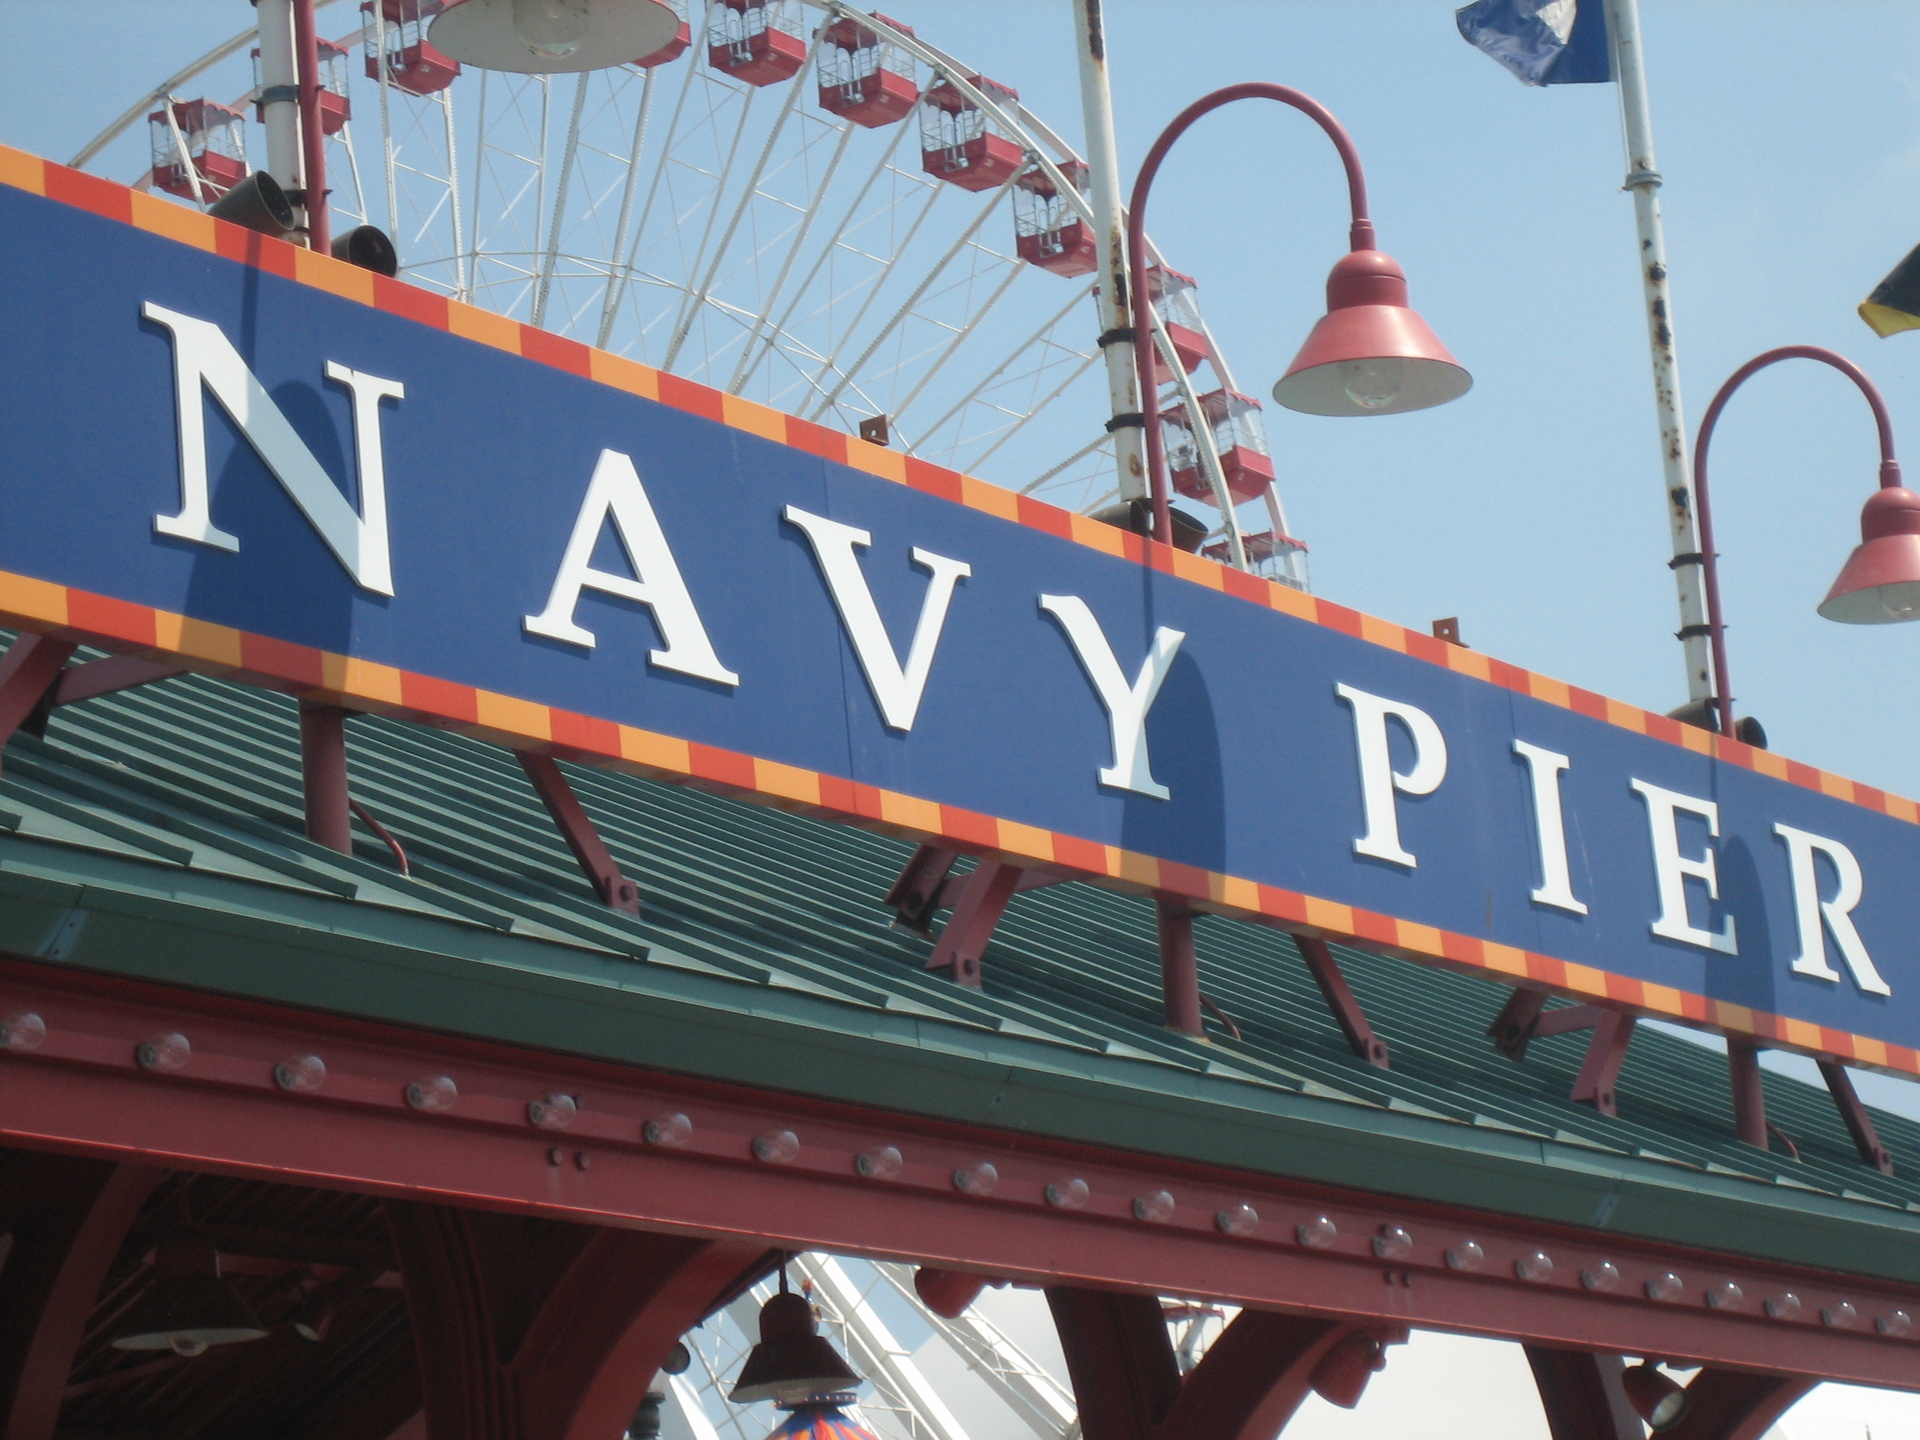 Chicago Image Navy Pier HD Wallpaper And Background Photos